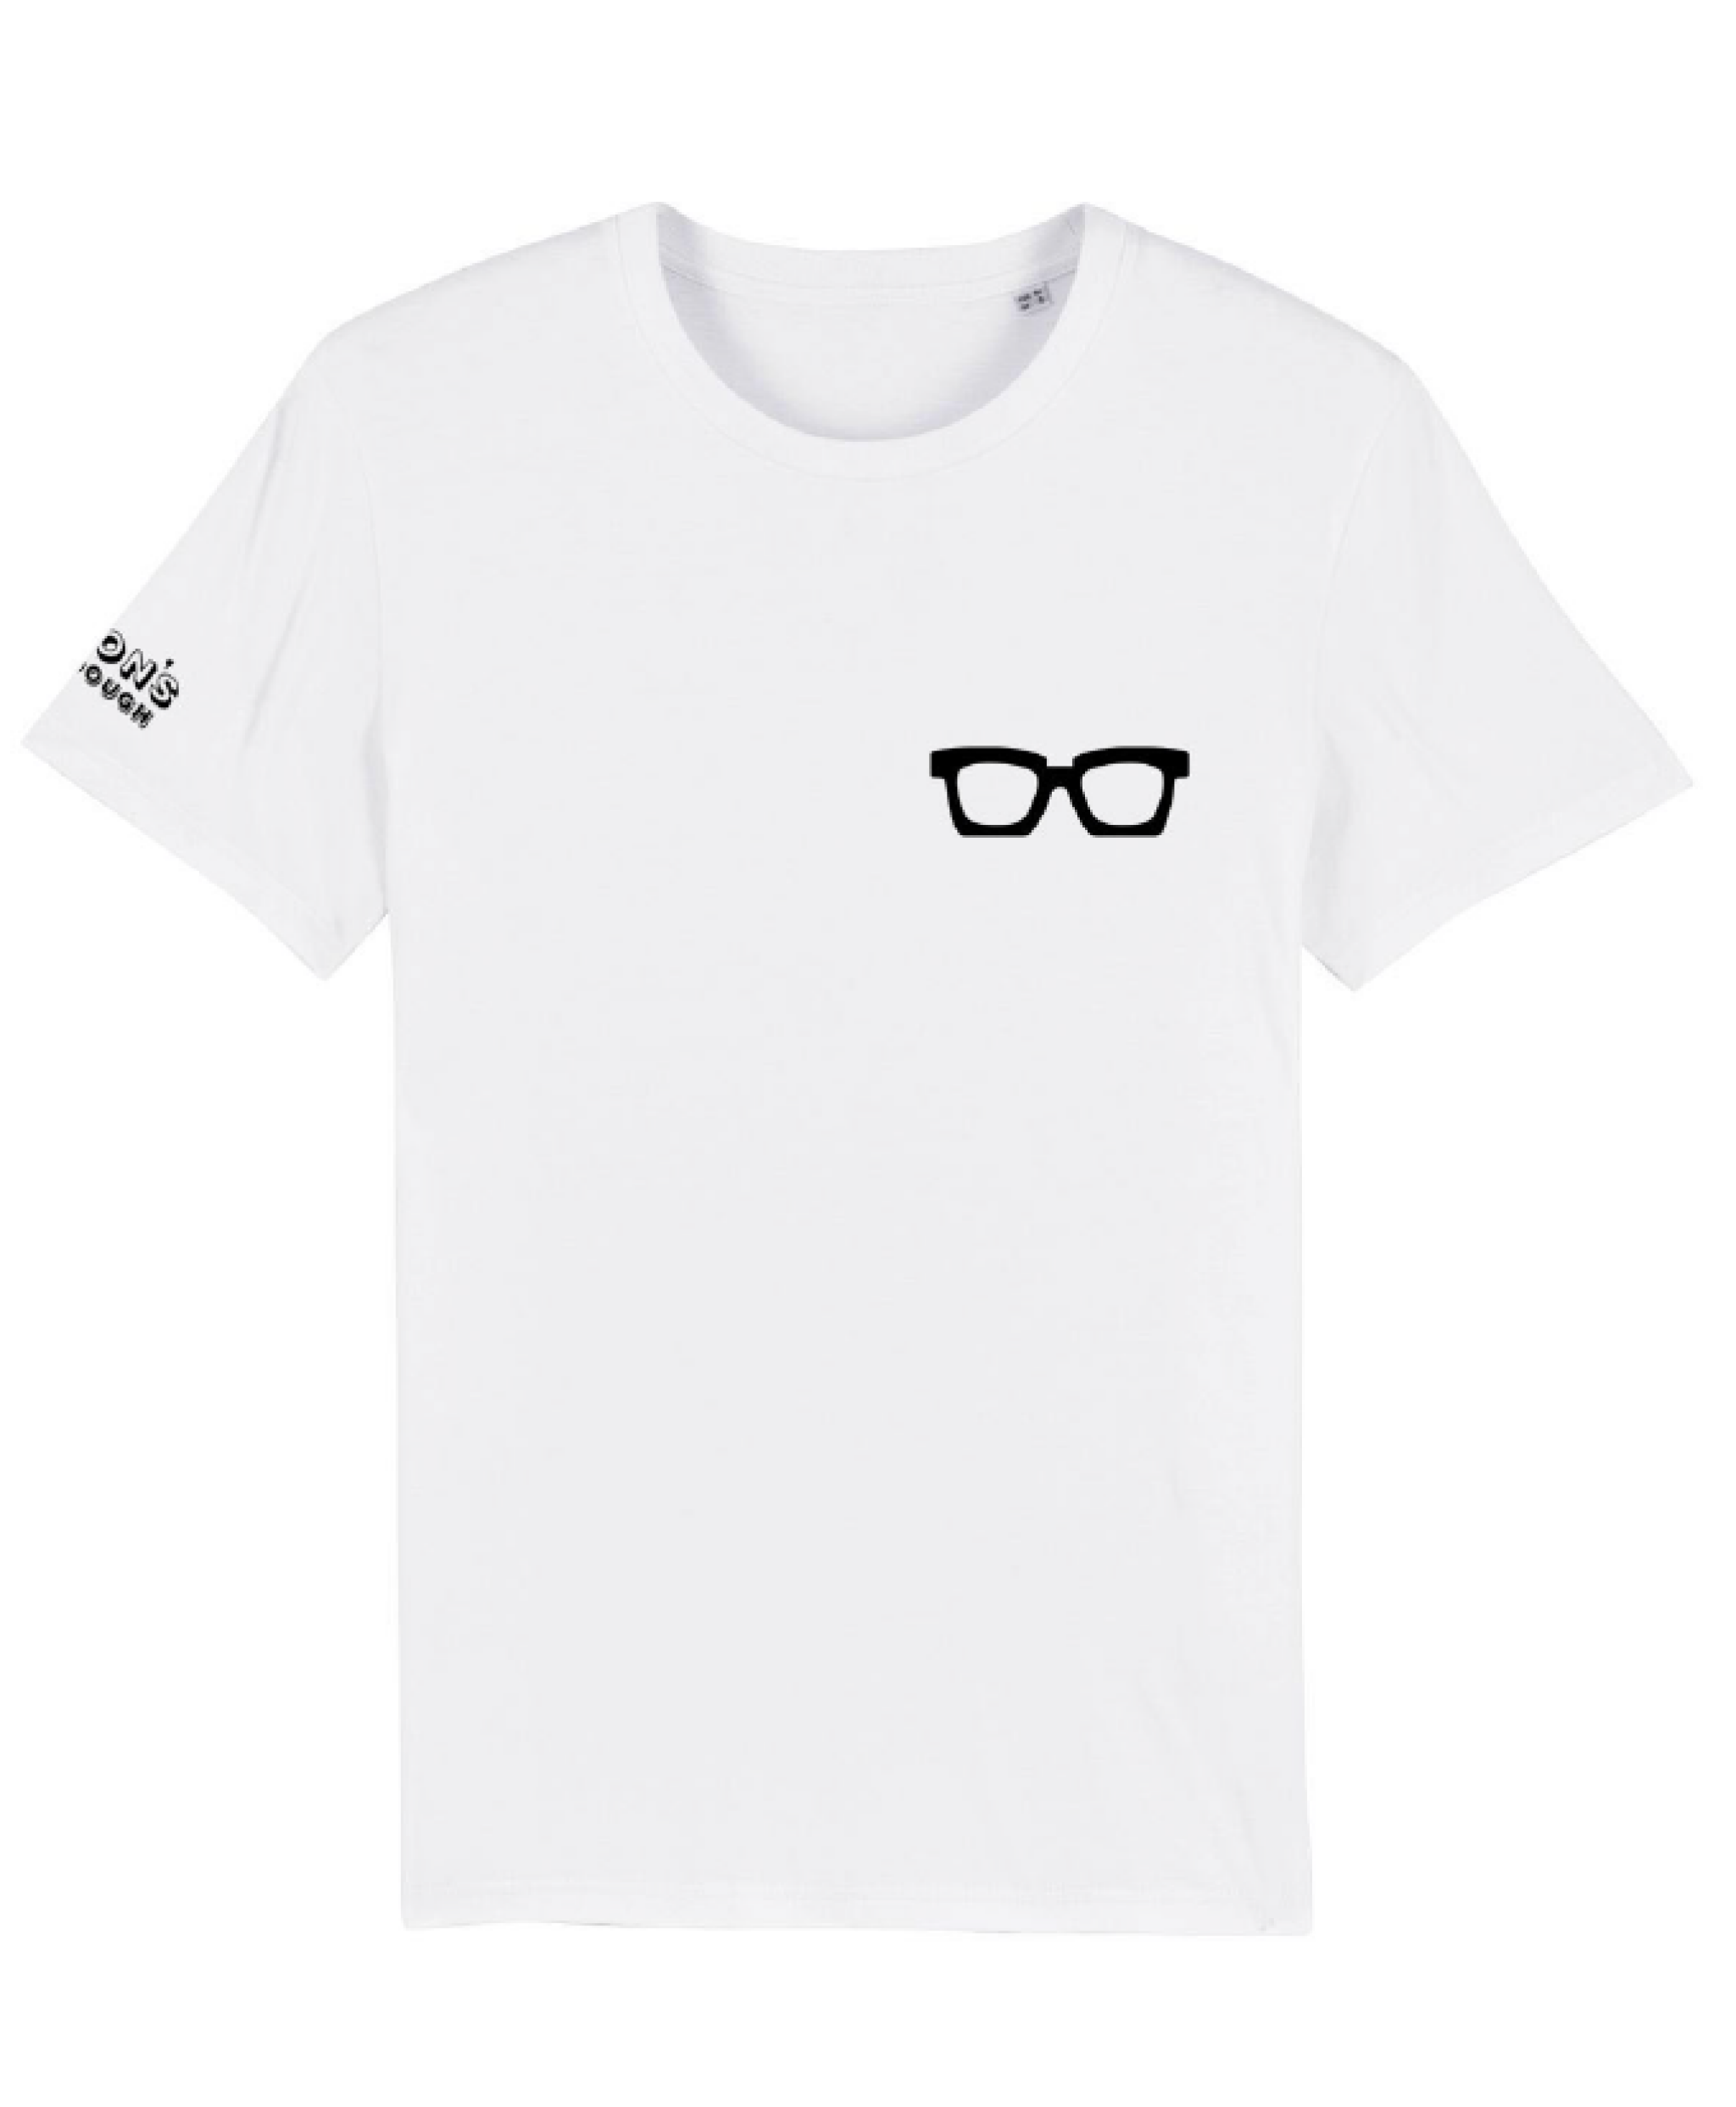 White tshirt Just Dough It front visual.png